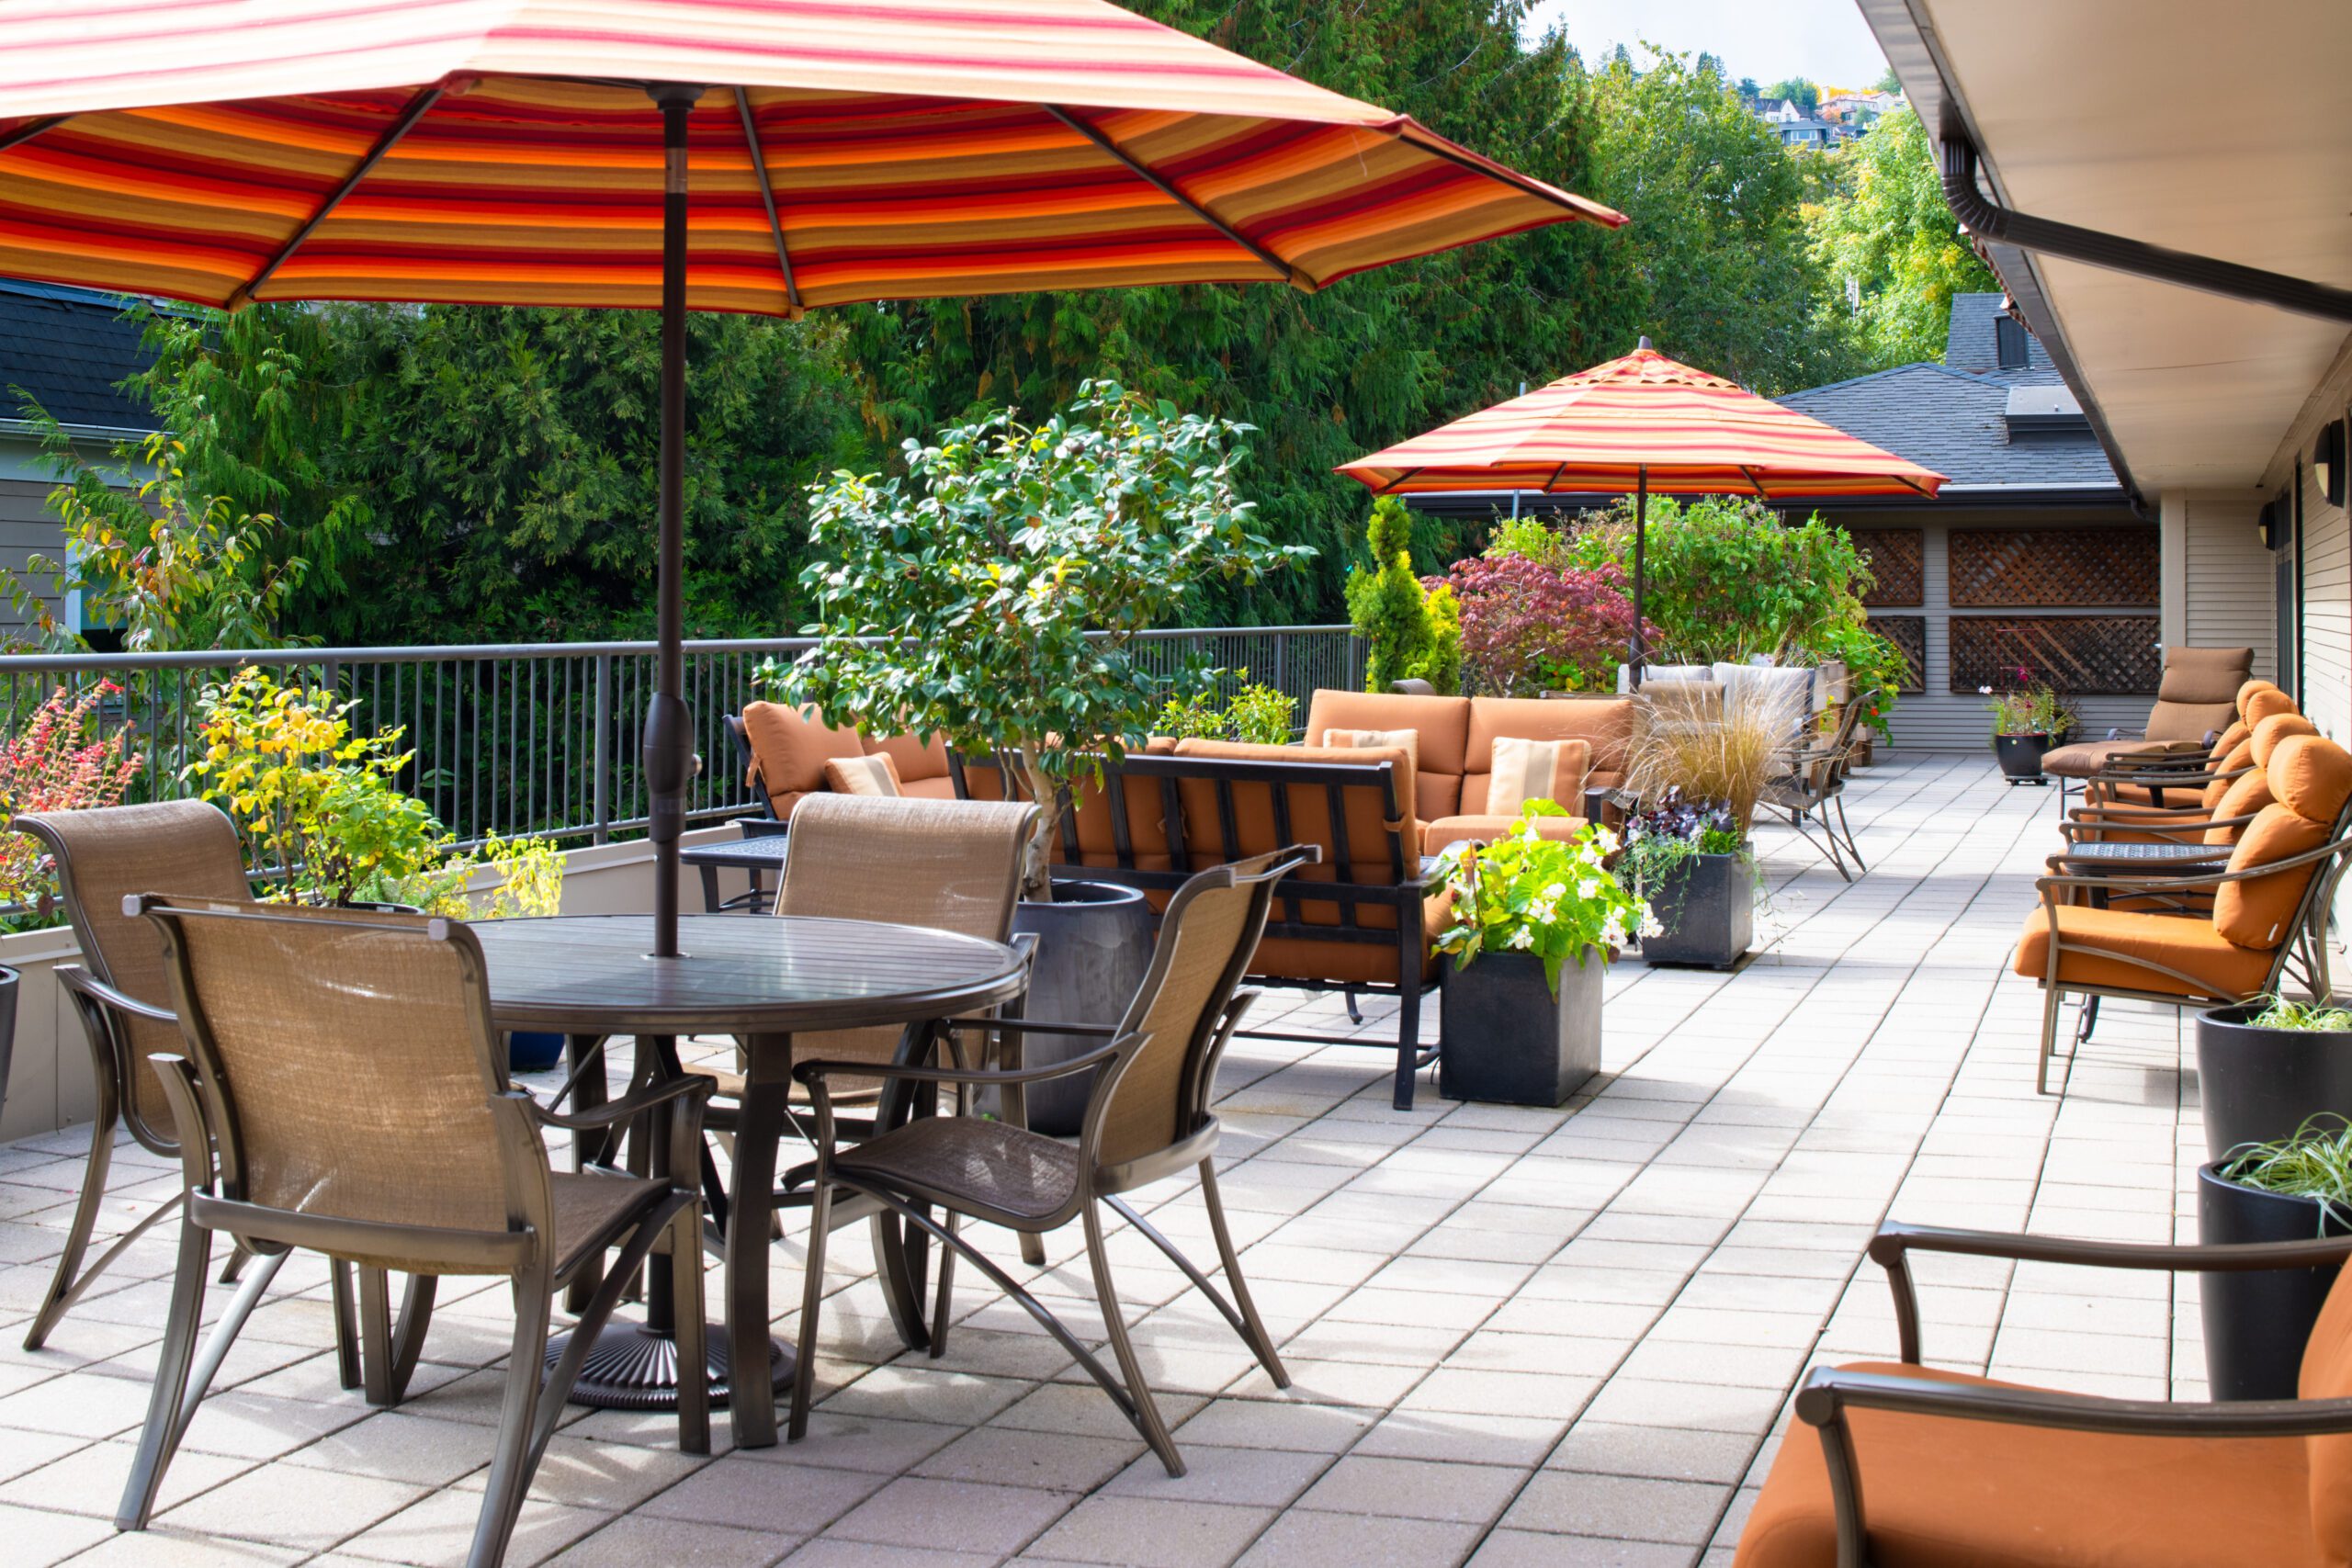 northwest place outdoor patio with umbrellas and tables